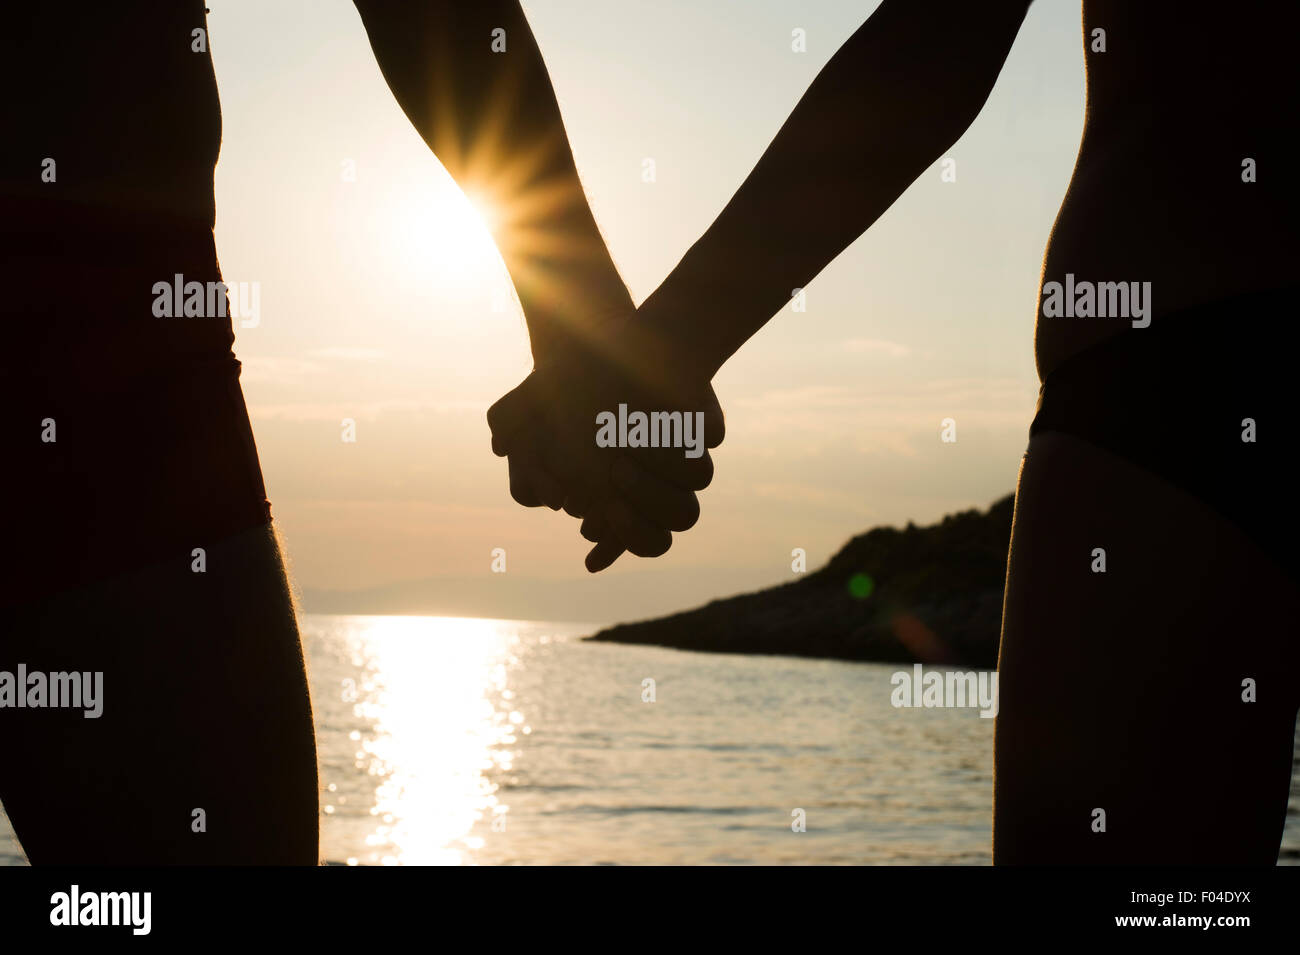 Closeup of a couple holding hands on a beach at sunset, silhouette effect. Stock Photo